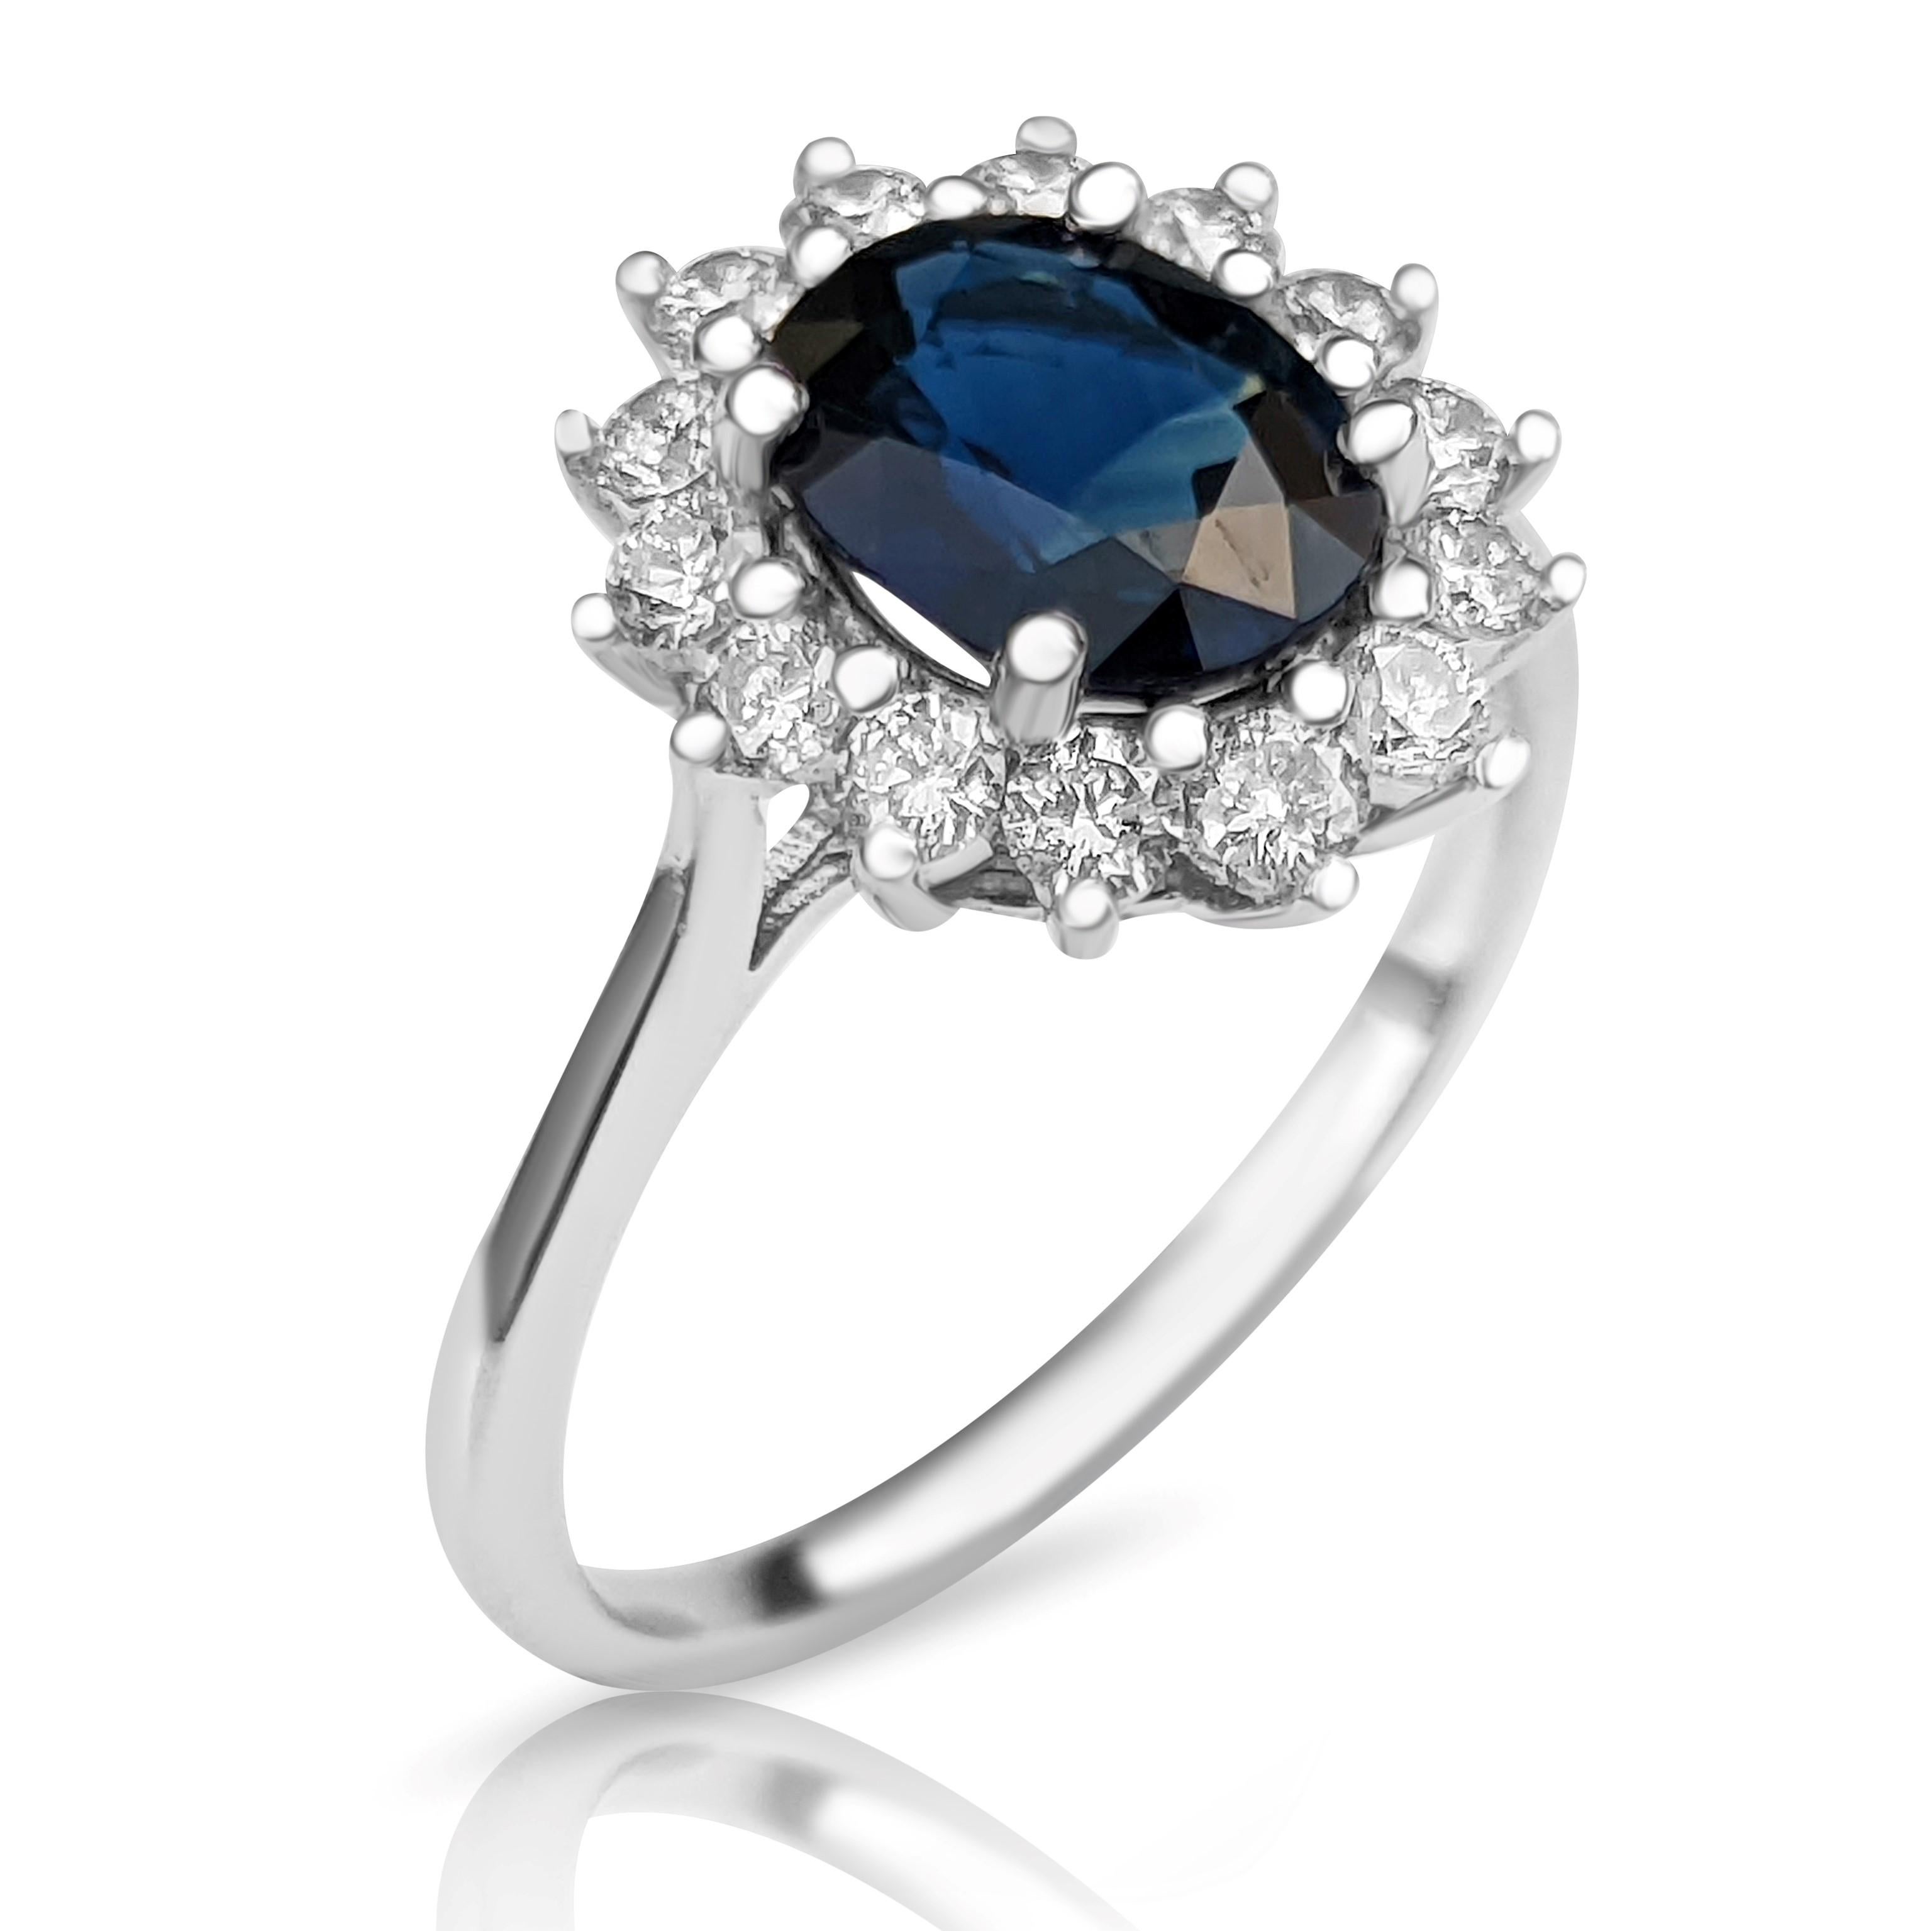 Oval Cut 1.81 Carat Blue Sapphire and 0.50 Ct Diamonds, 14 Kt. White Gold, Ring